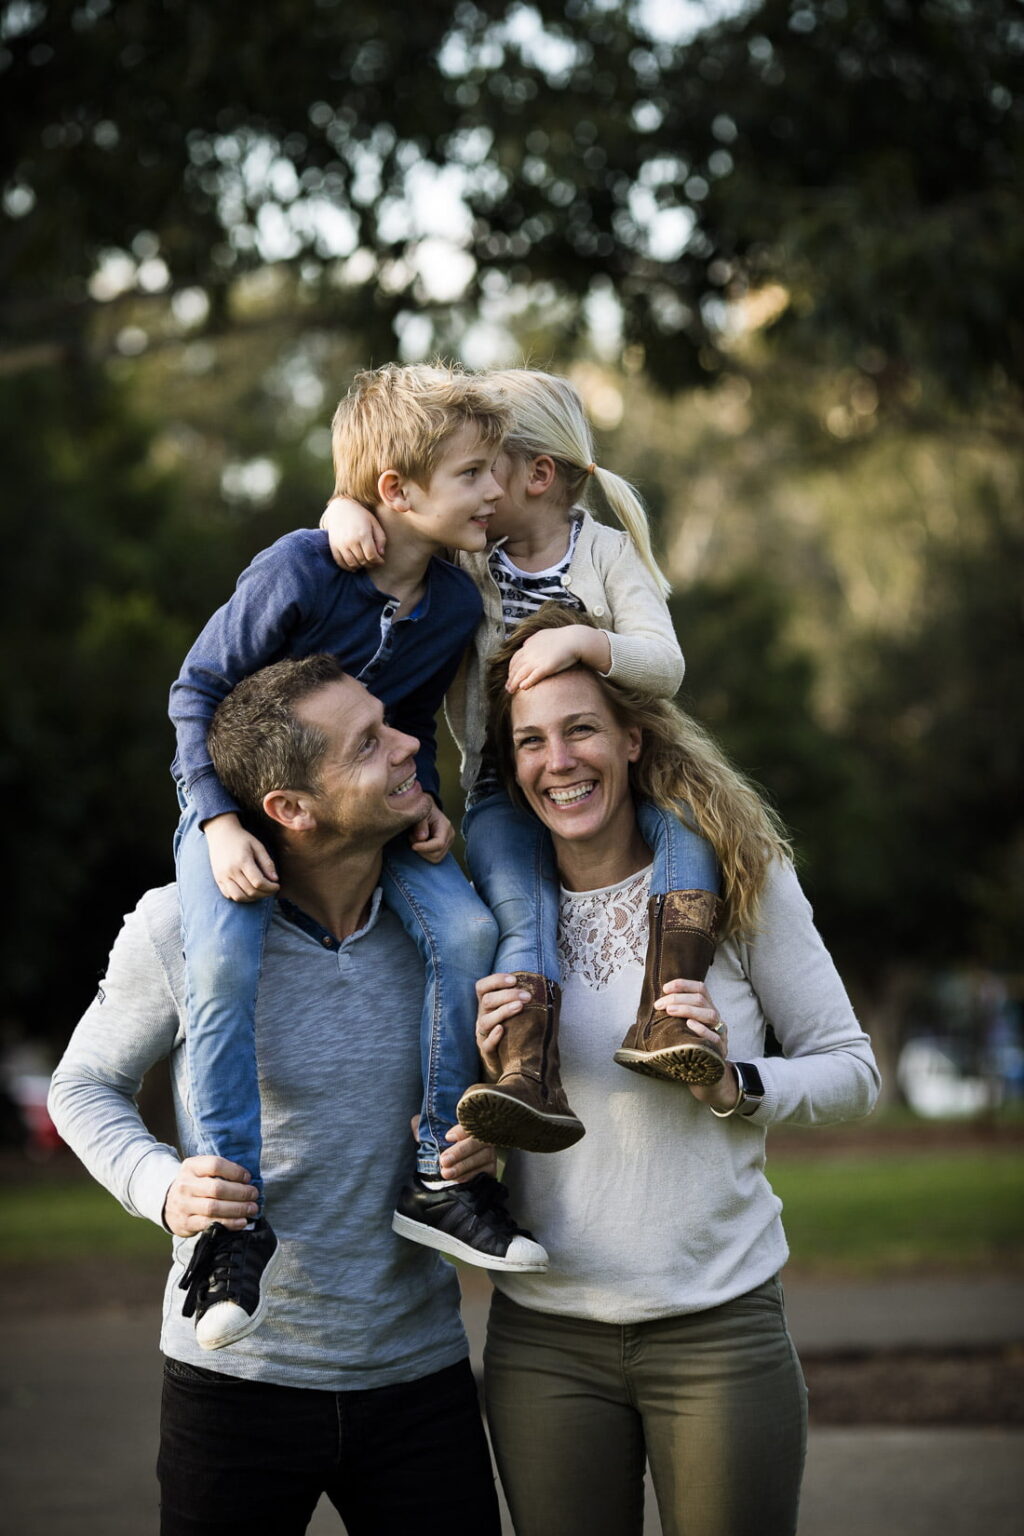 family portrait outdoors in park